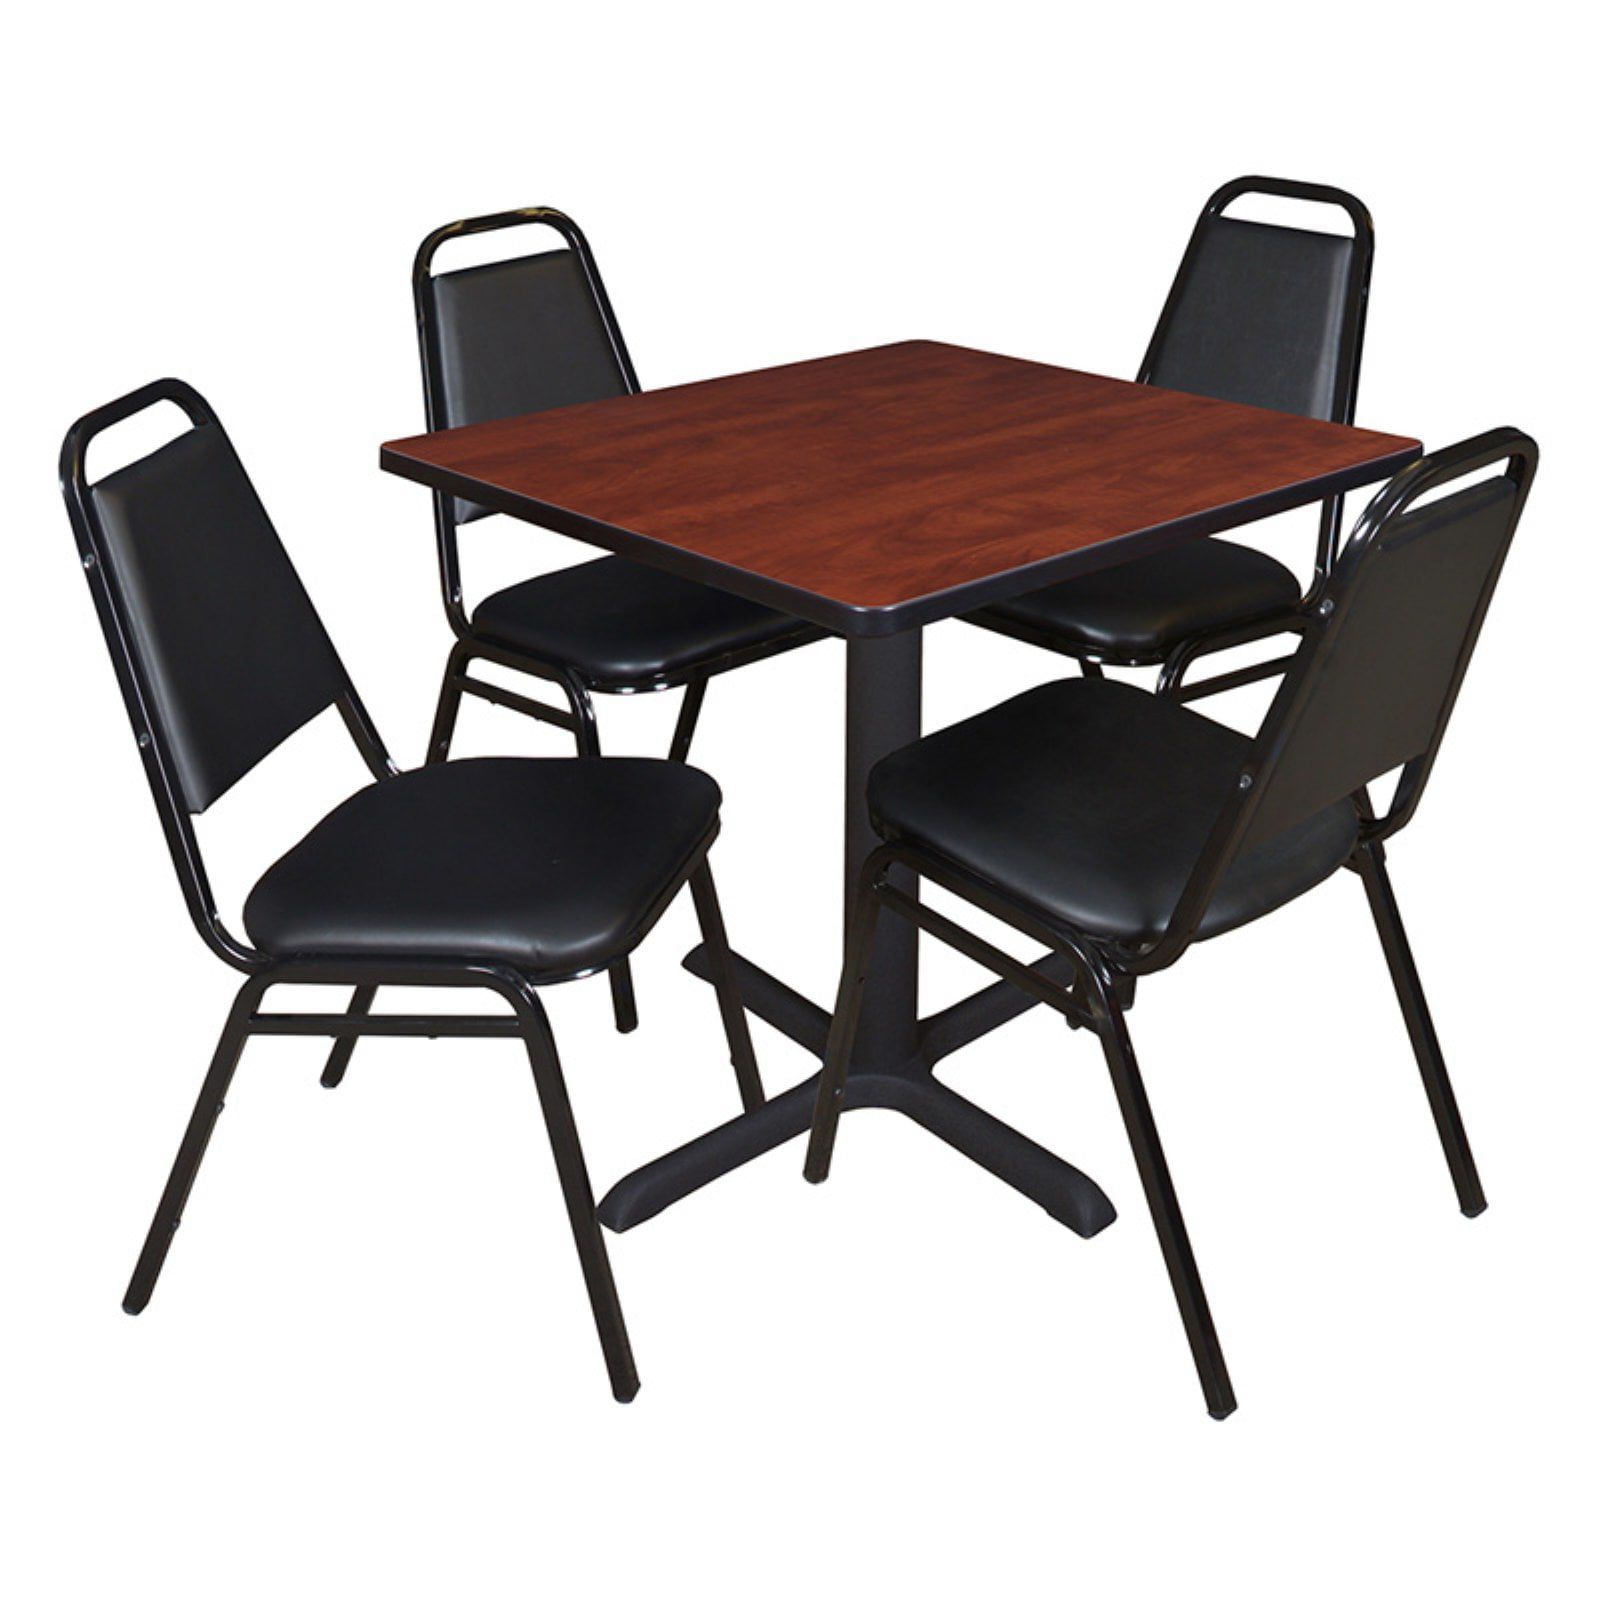 Regency Cain Square Breakroom Table With 4 Stackable Restaurant Chairs For Regency Cain Steel Coffee Tables (View 10 of 20)